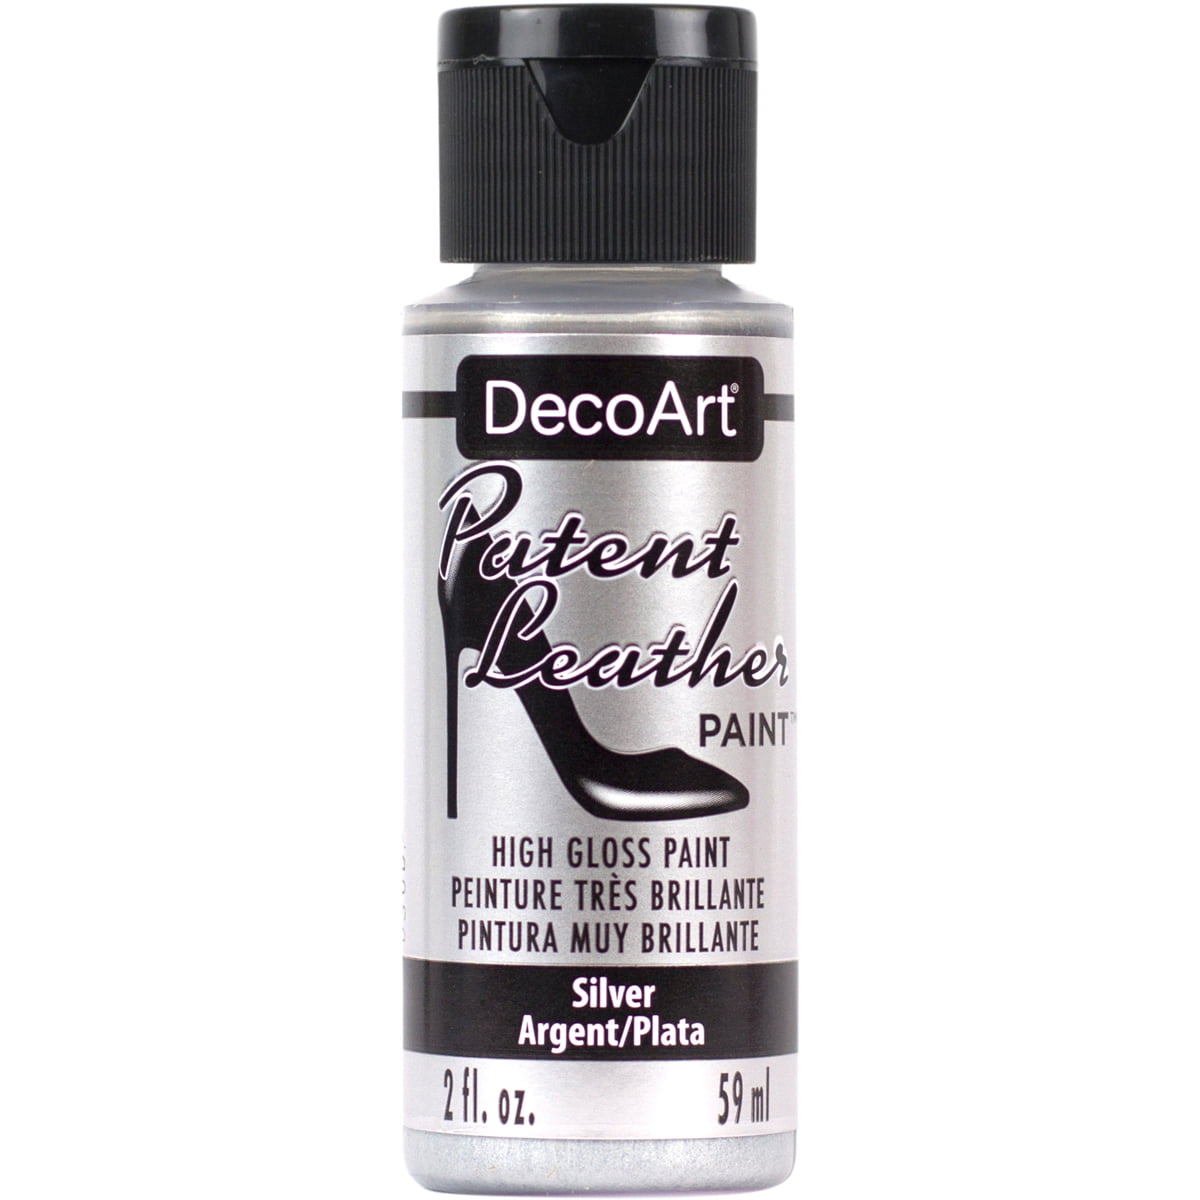 Re-coloring Patent Leather in One Step｜Lorence Patent Leather Stain - D&A